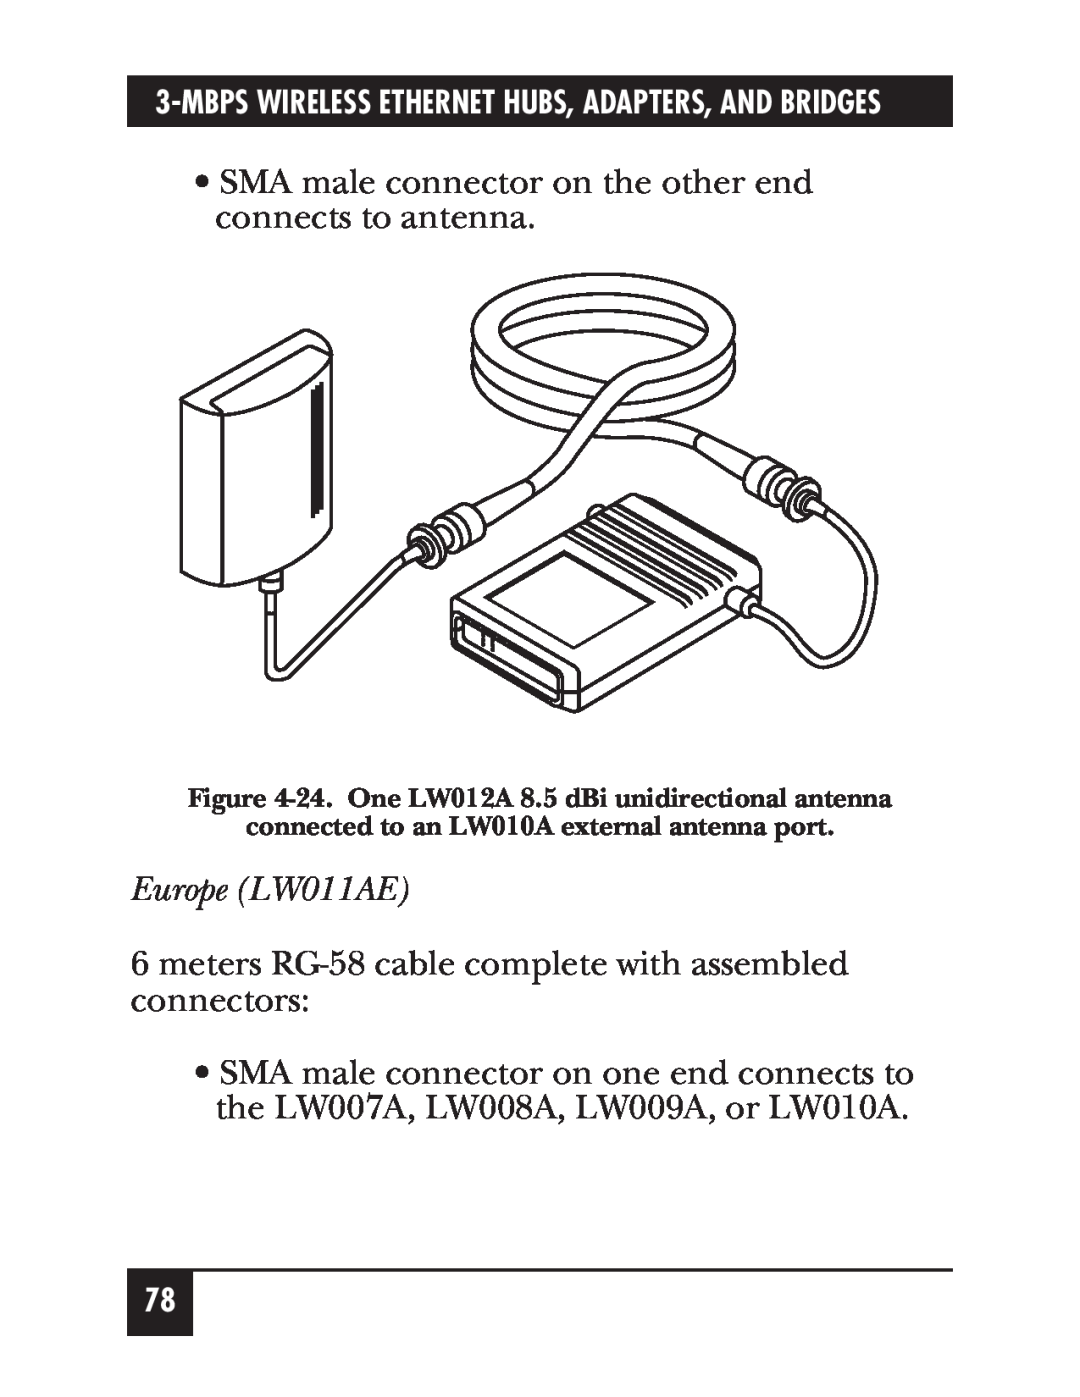 Black Box LW012AE, LW008A, LW005A, LW009A manual SMA male connector on the other end connects to antenna, Europe LW011AE 